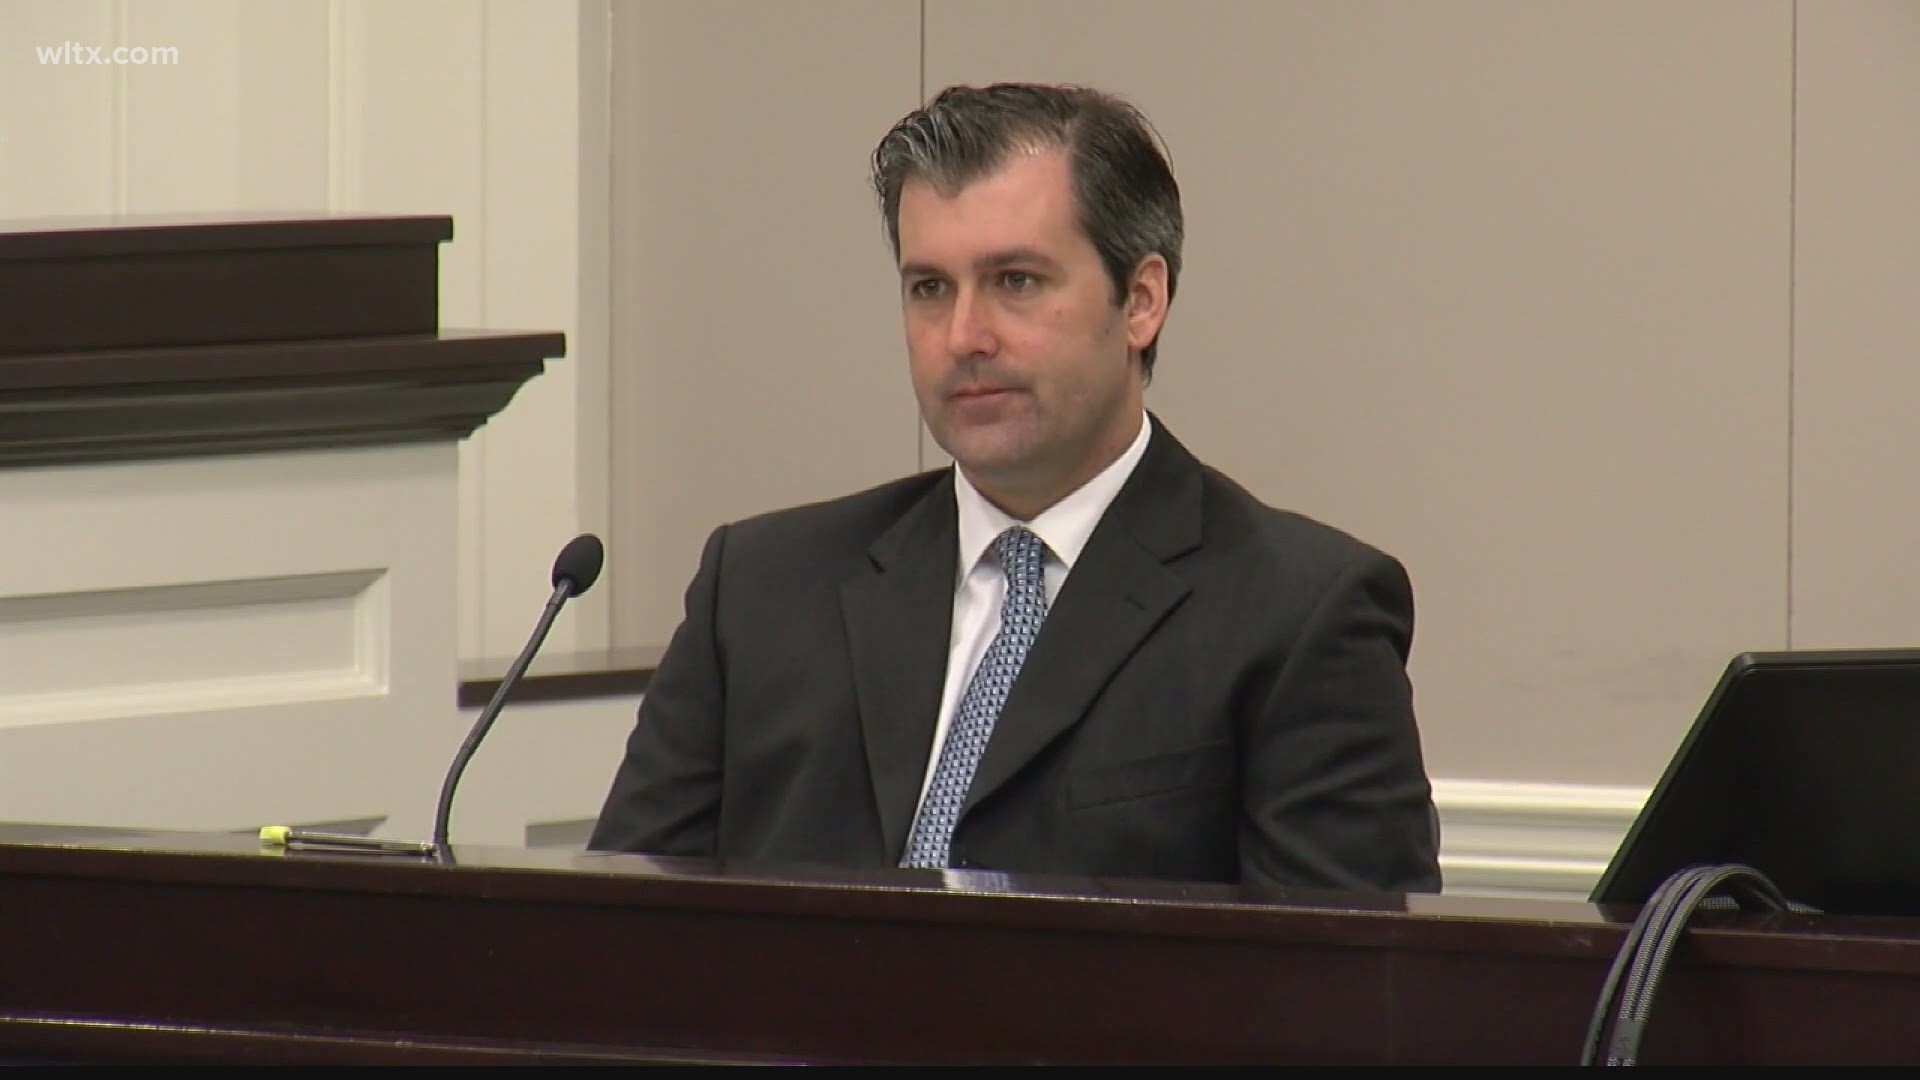 The former North Charleston police officer who shot and killed an unarmed black man wants his 20 year sentence changed.